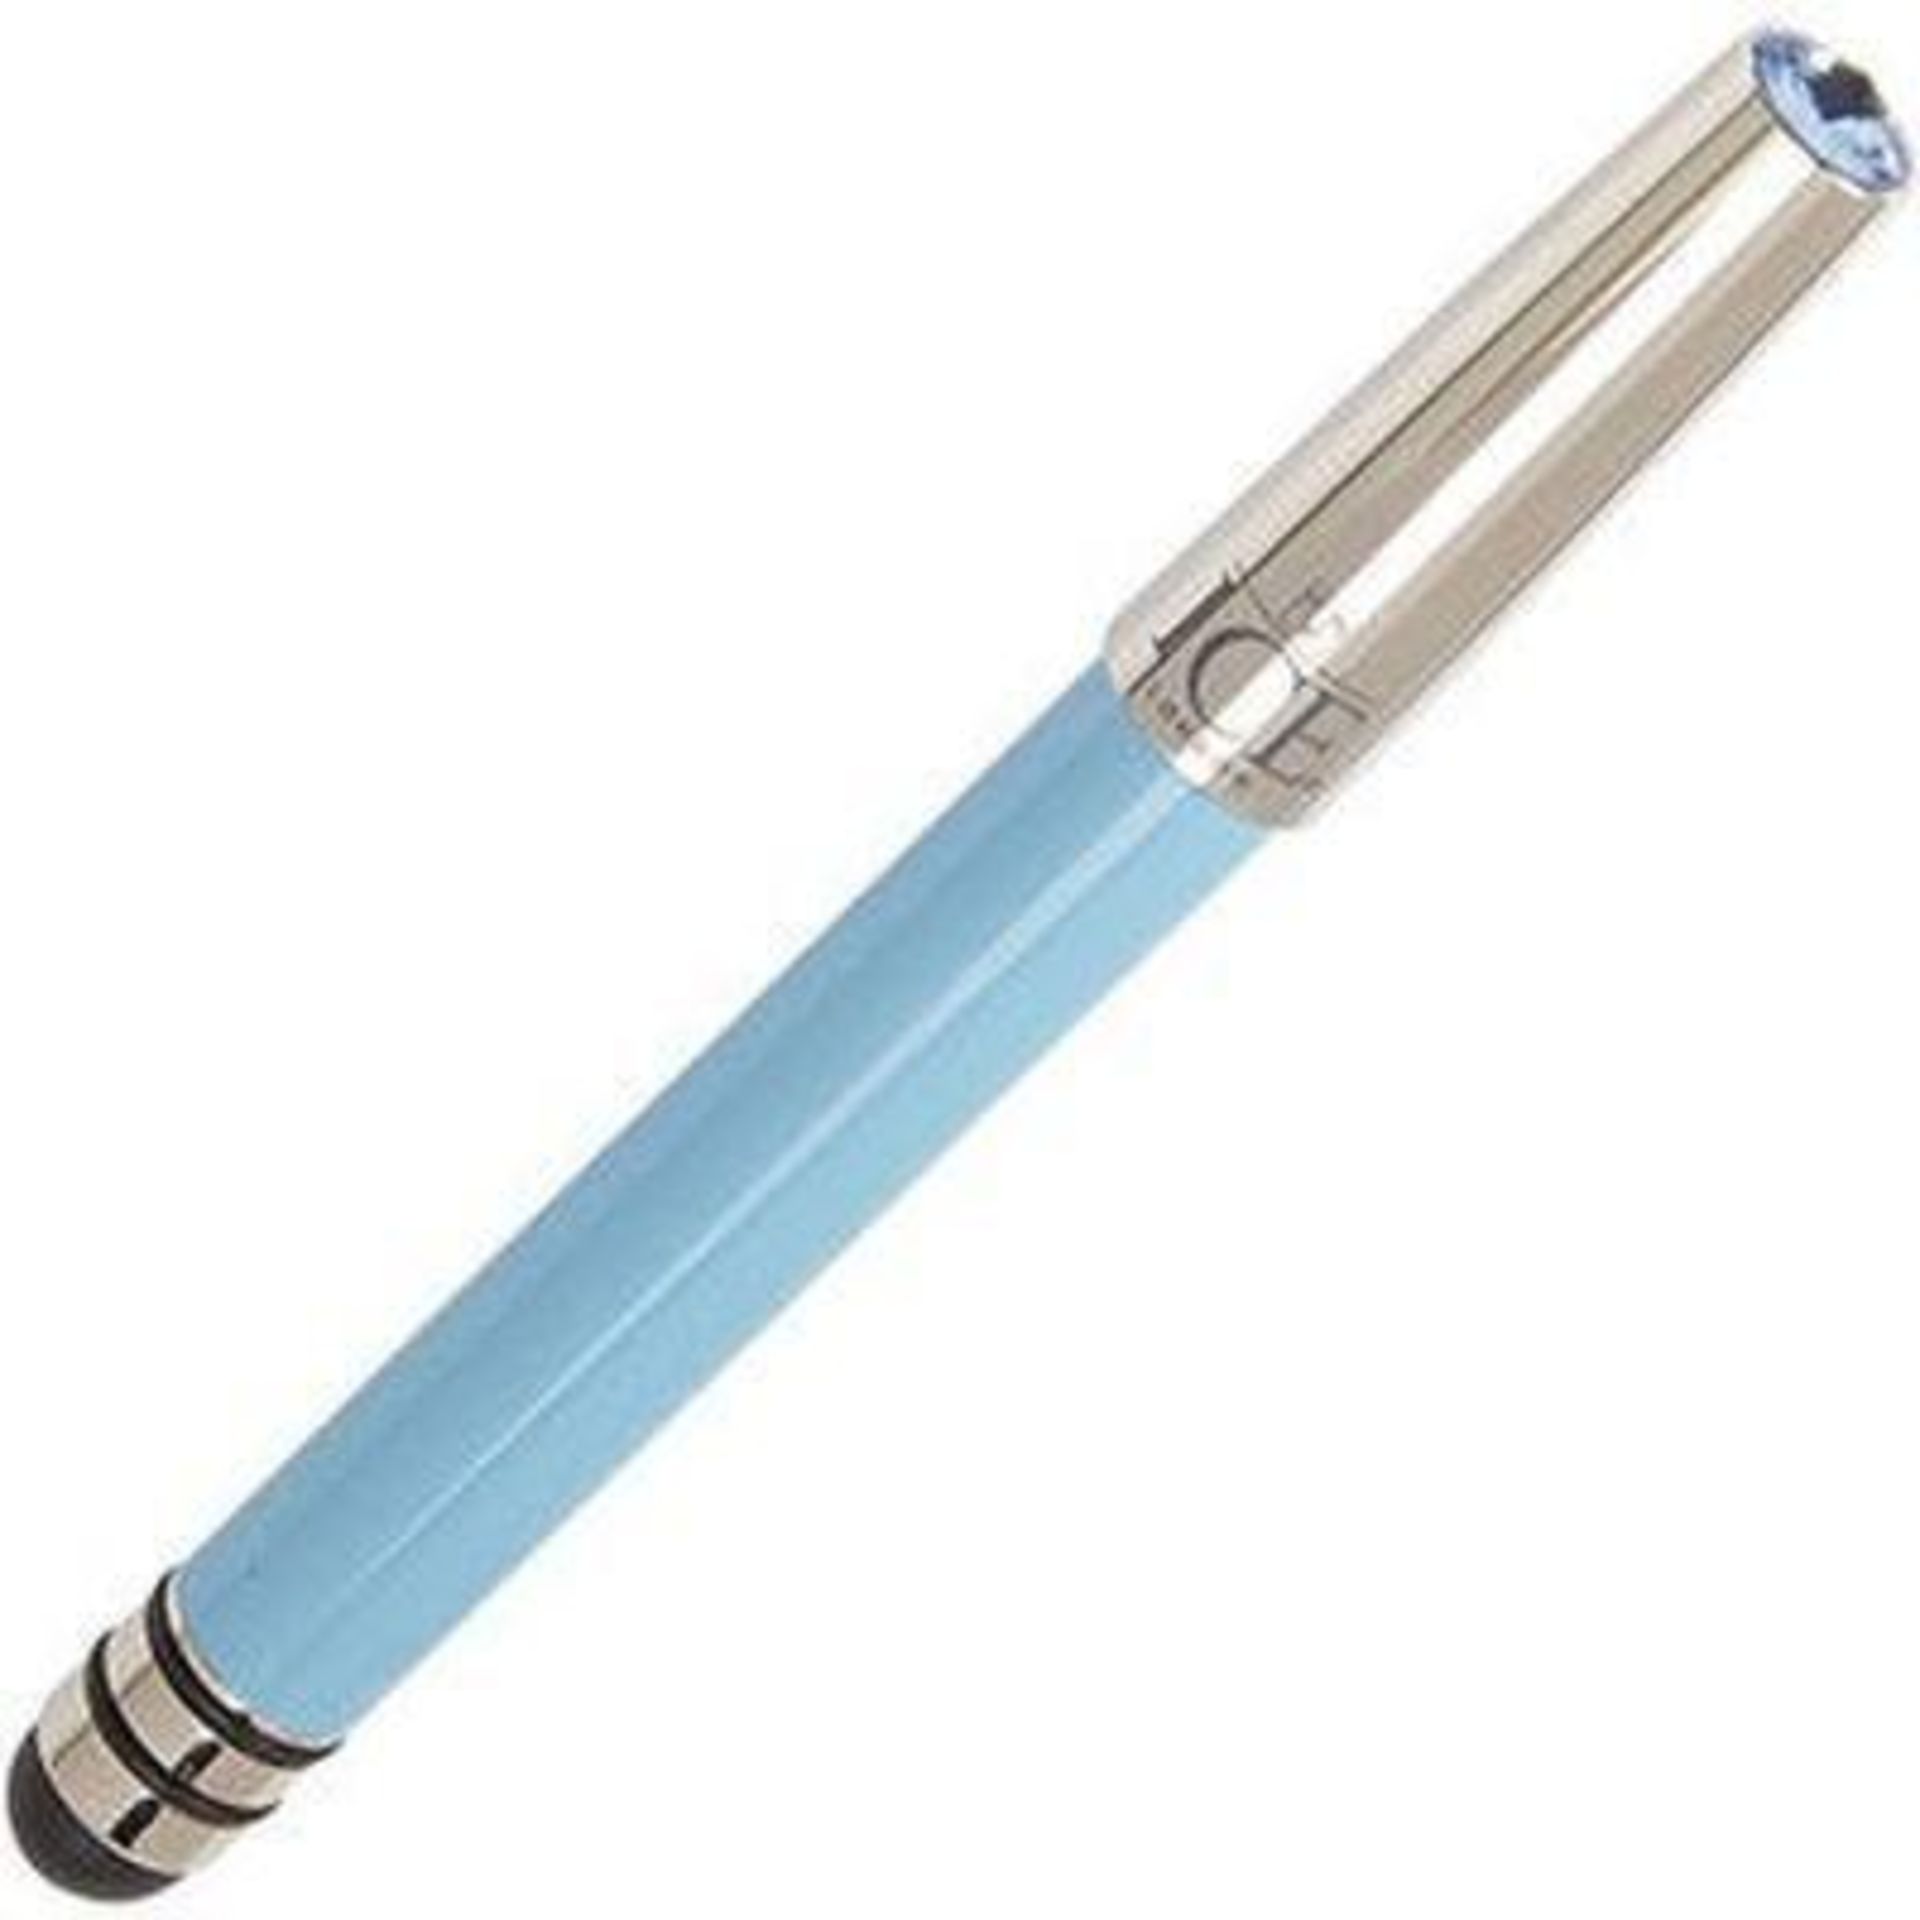 50 x ICE LONDON App Pen Duo - Touch Stylus And Ink Pen Combined - Colour: LIGHT BLUE - MADE WITH - Image 4 of 5